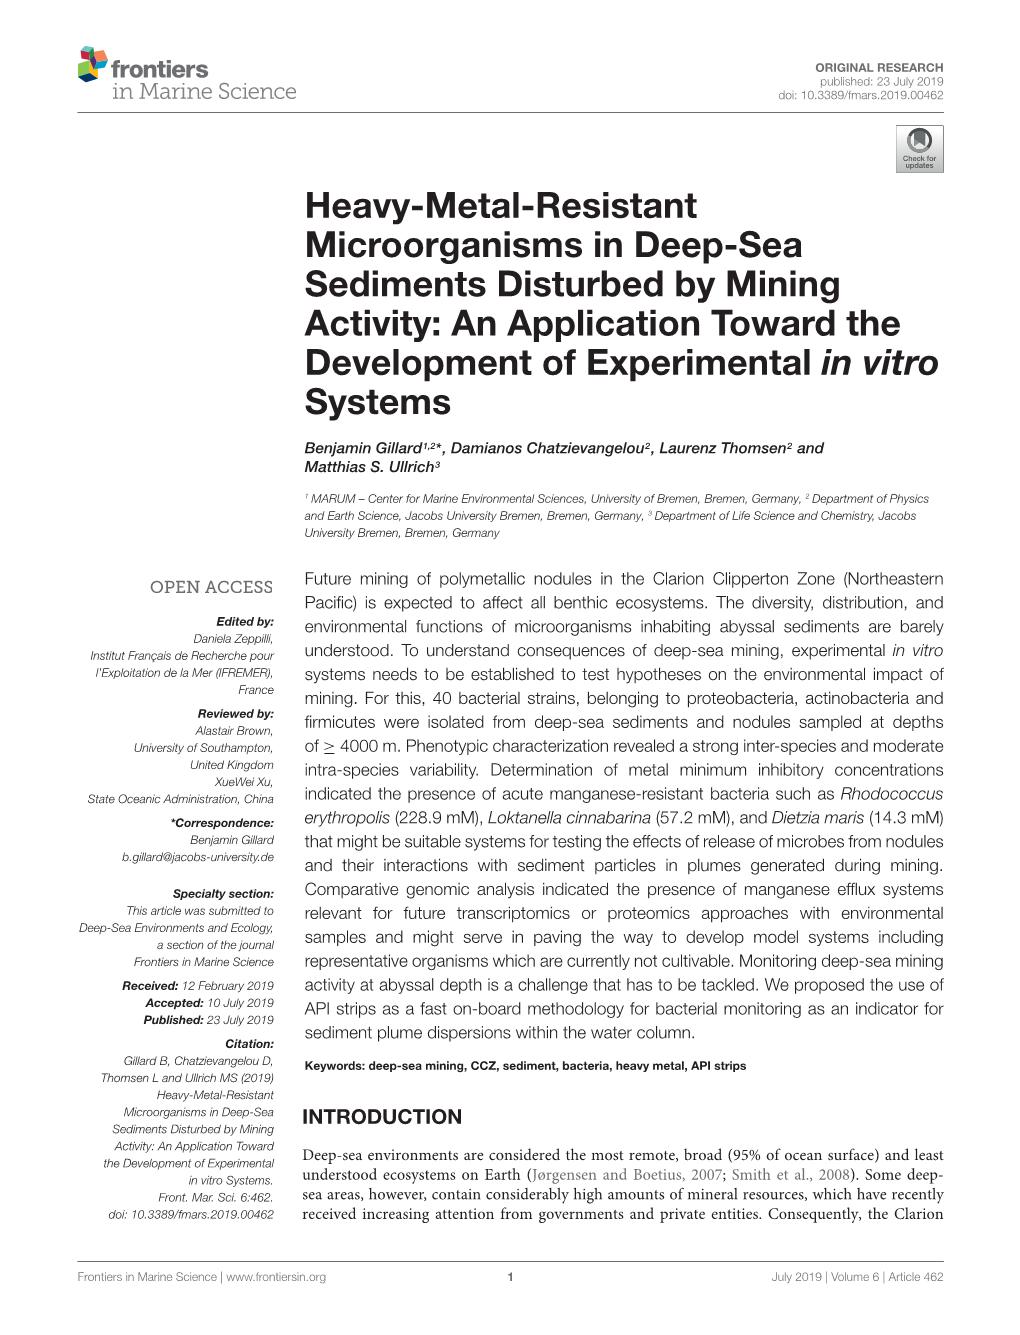 Heavy-Metal-Resistant Microorganisms in Deep-Sea Sediments Disturbed by Mining Activity: an Application Toward the Development of Experimental in Vitro Systems